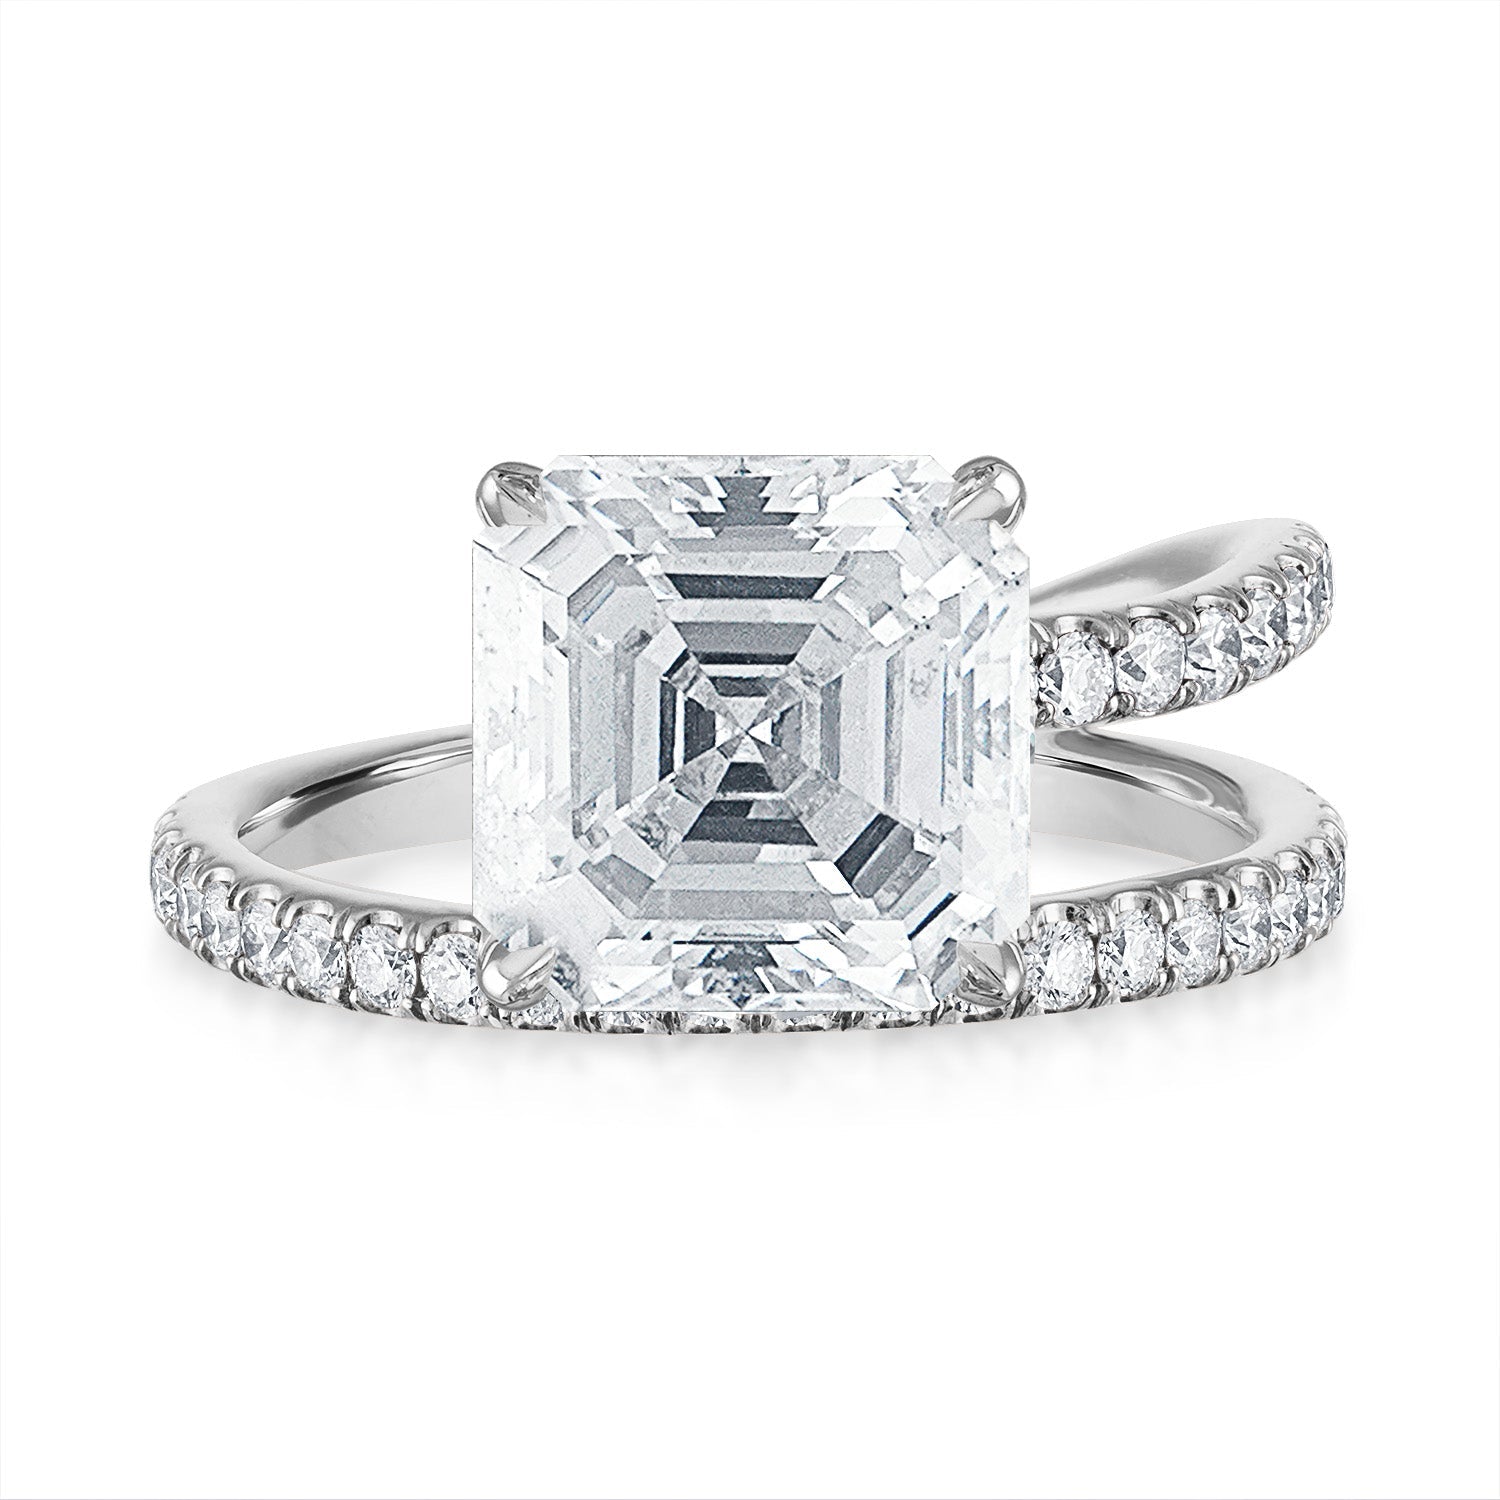 Asscher Band and a Half Engagement Ring in Platinum